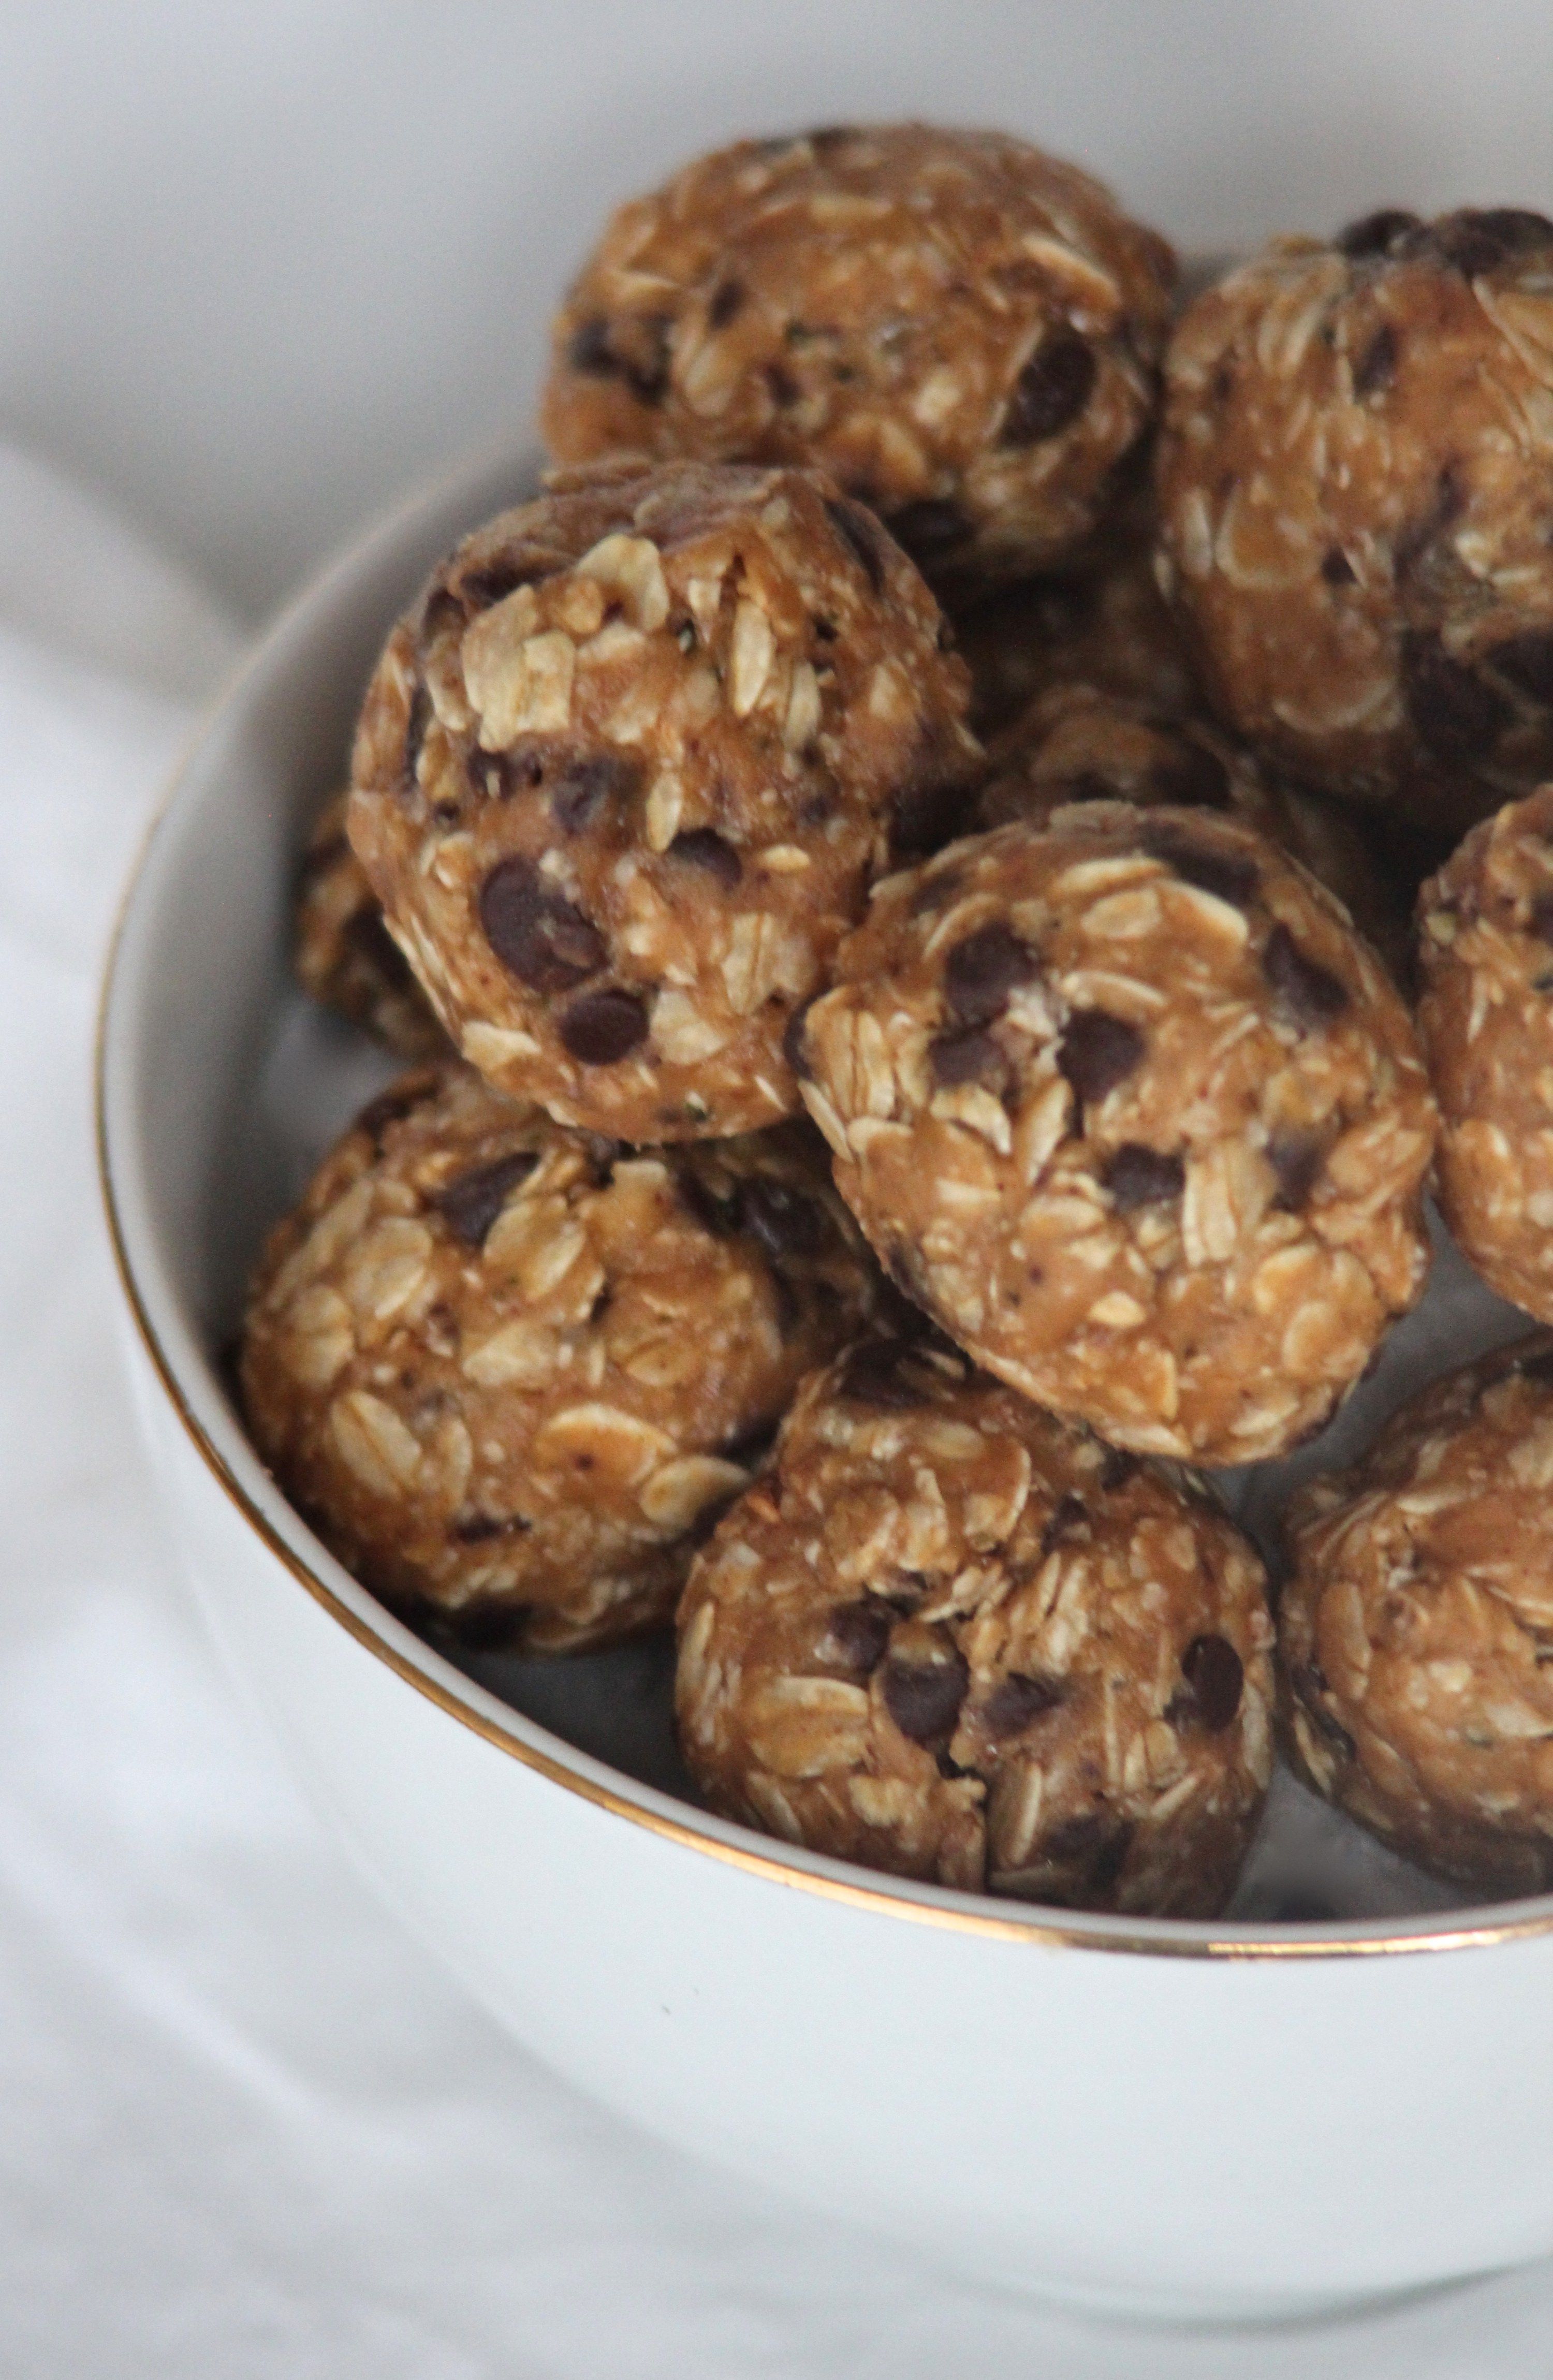 4 ingredient peanut butter oatmeal chocolate chip energy bites (only 100 calories and 7g of sugar per bite!) -   21 fitness food chocolate chips
 ideas